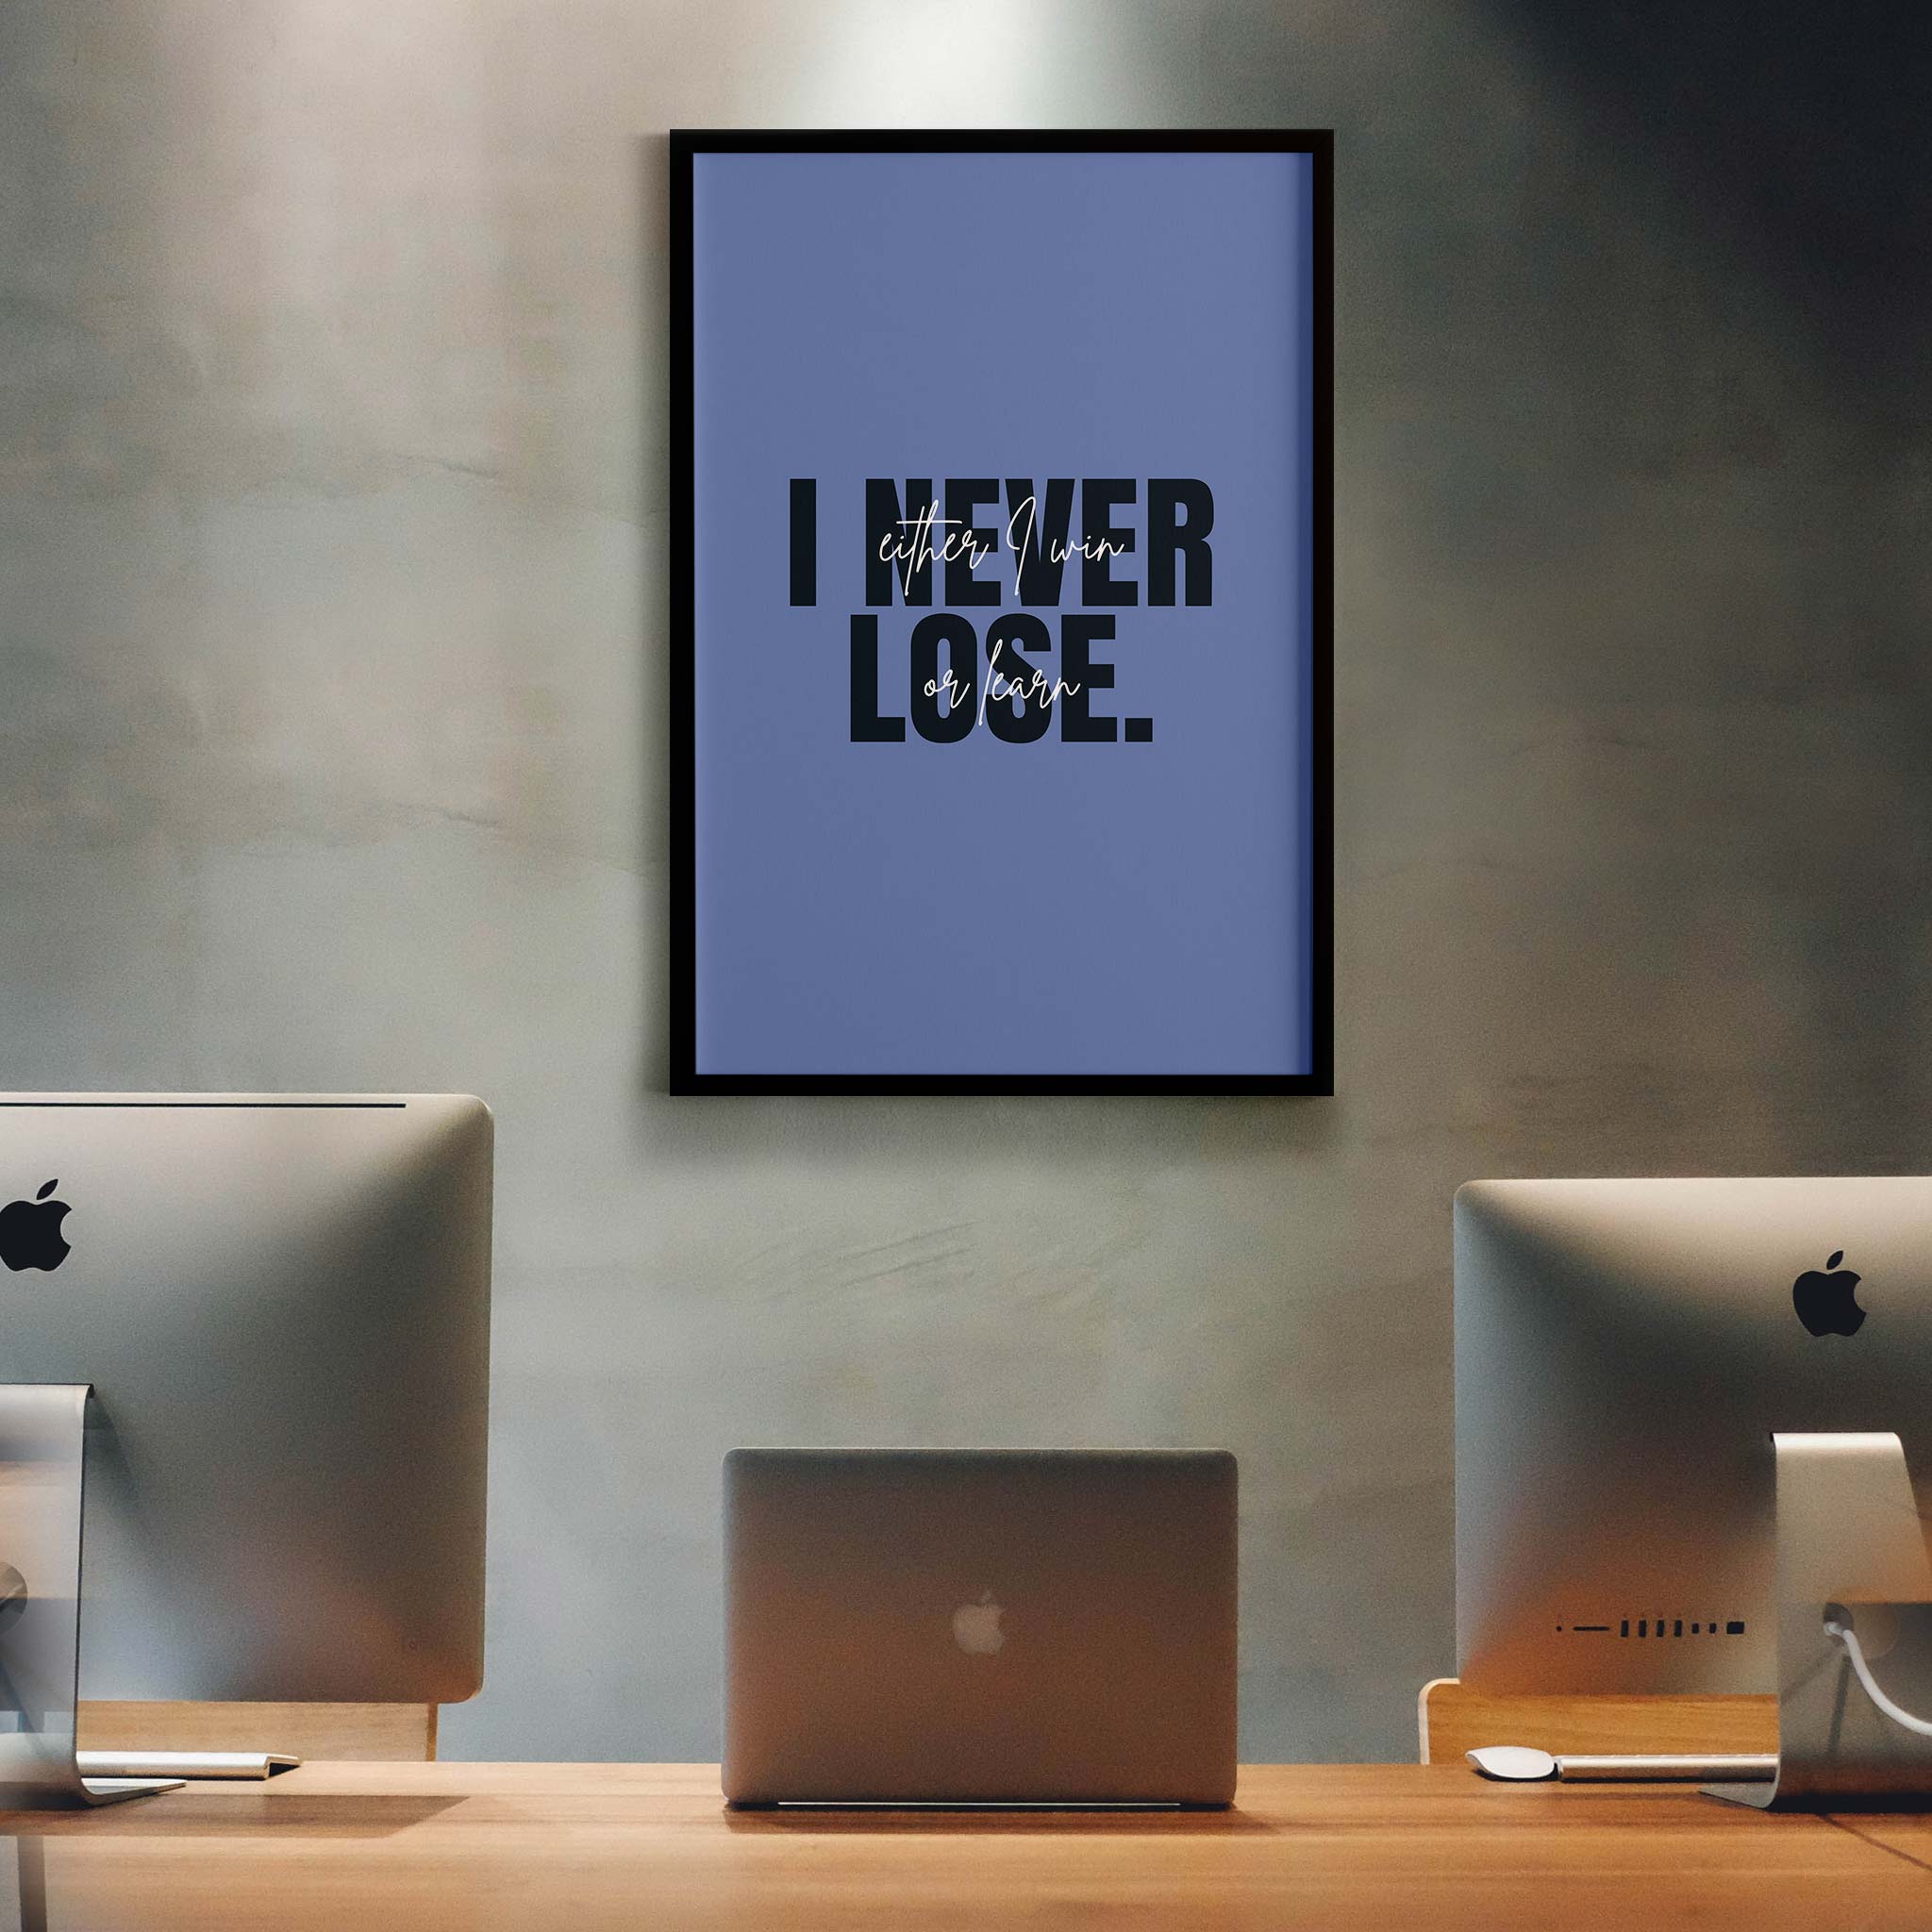 I never lose. Either I win or learn